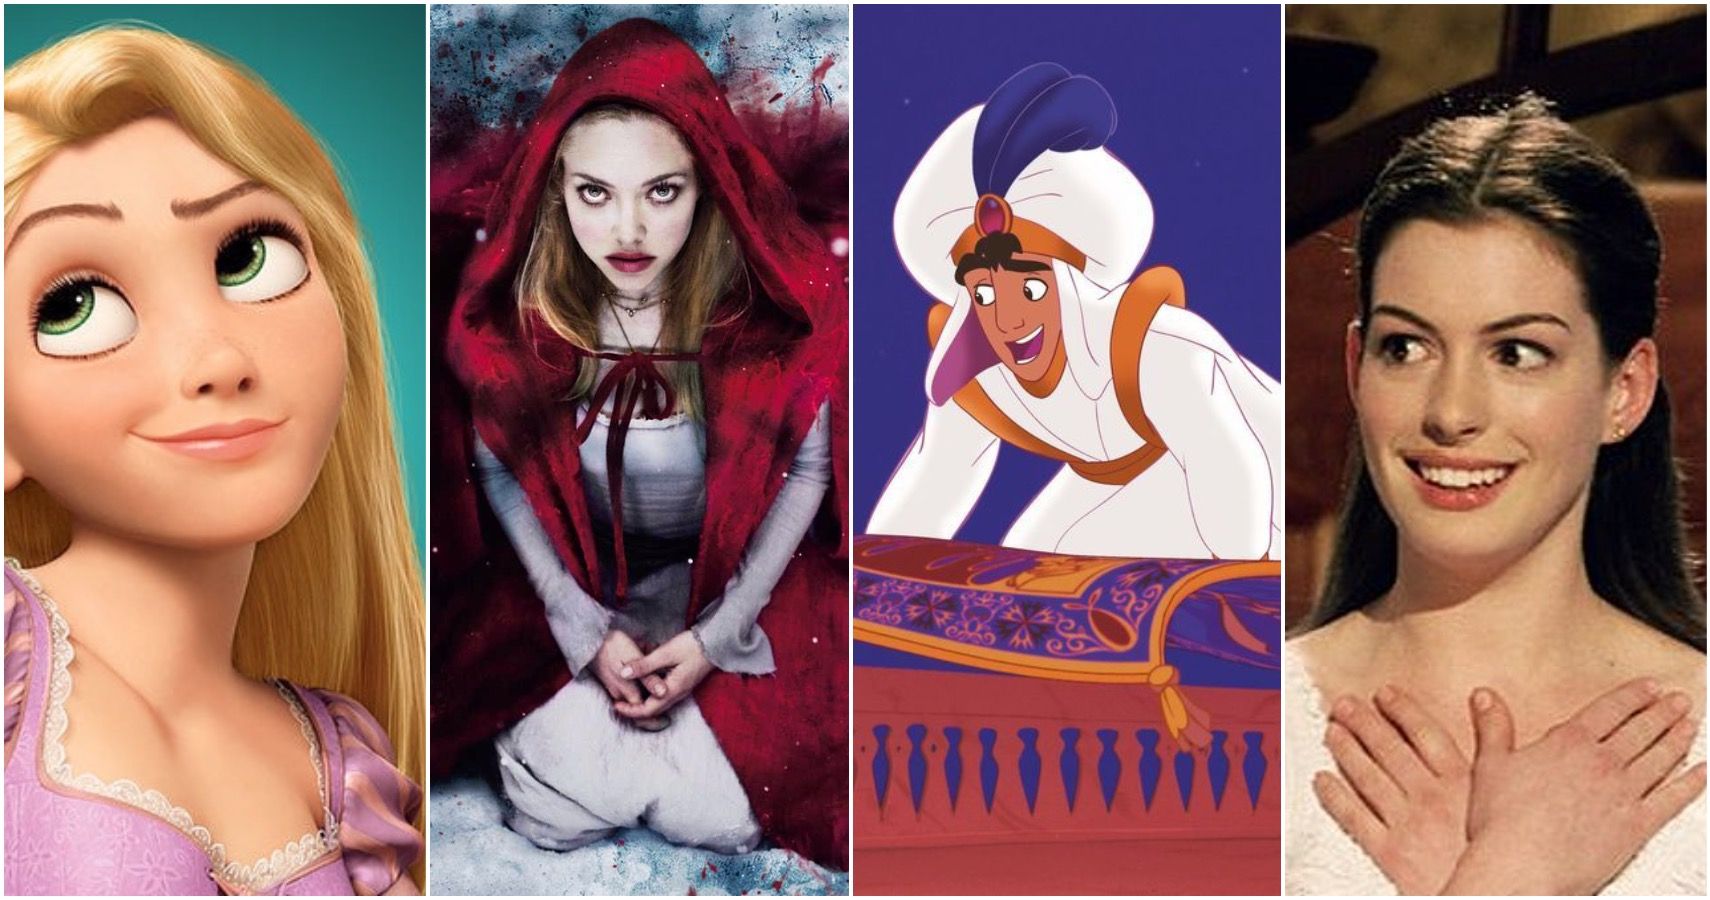 5 Of The Best Fairytale Film Adaptations (& 5 Of The Worst) According To IMDb